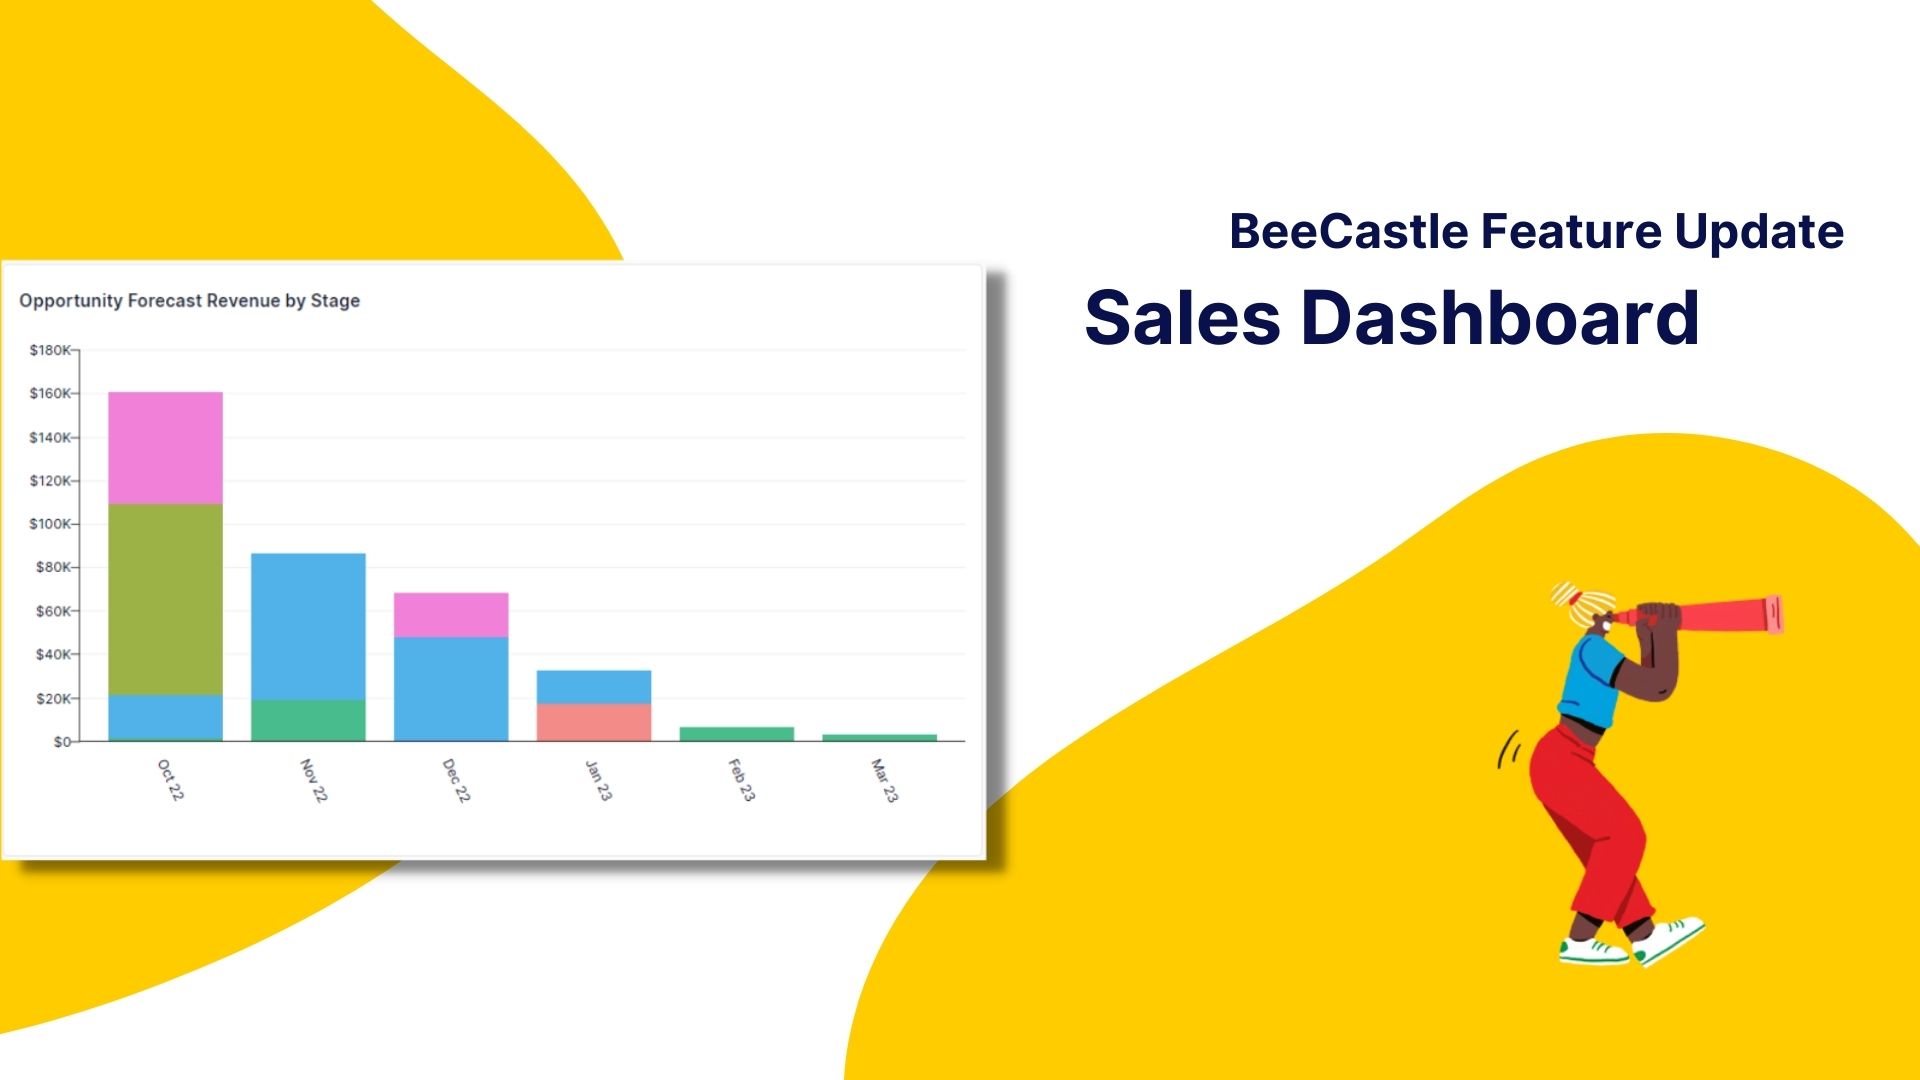 Thumbnail of Sales Dashboard - Drive Results with Visibility